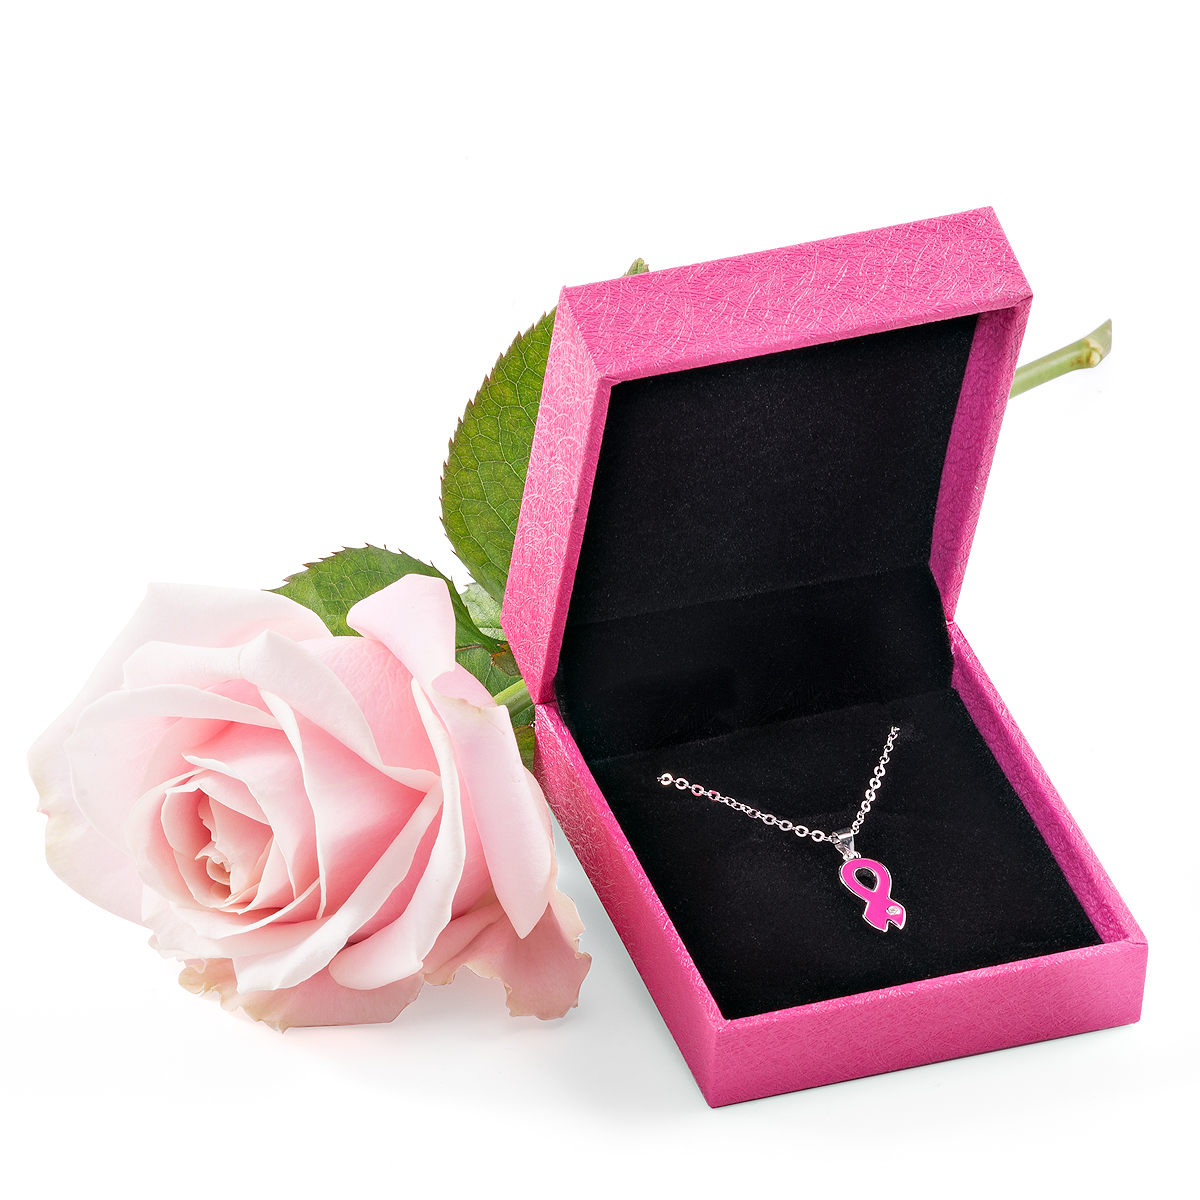     PHOTOS OF ROSES AND GIFTS FOR WOMAN